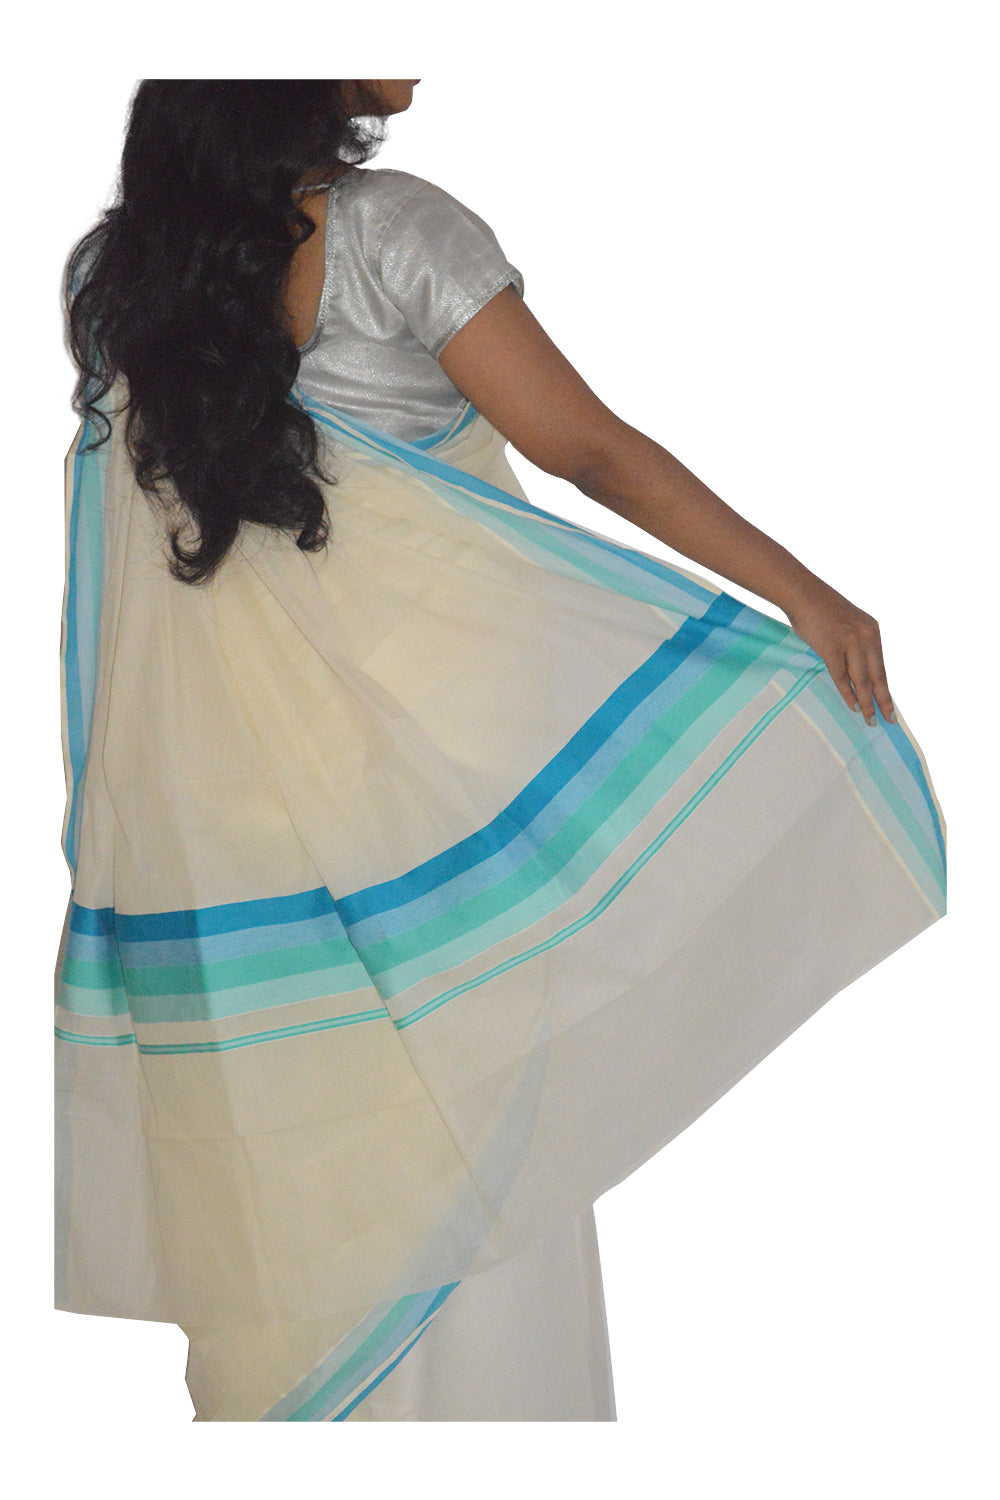 Kerala Saree with Sky Blue and Turquoise Lines Border Design